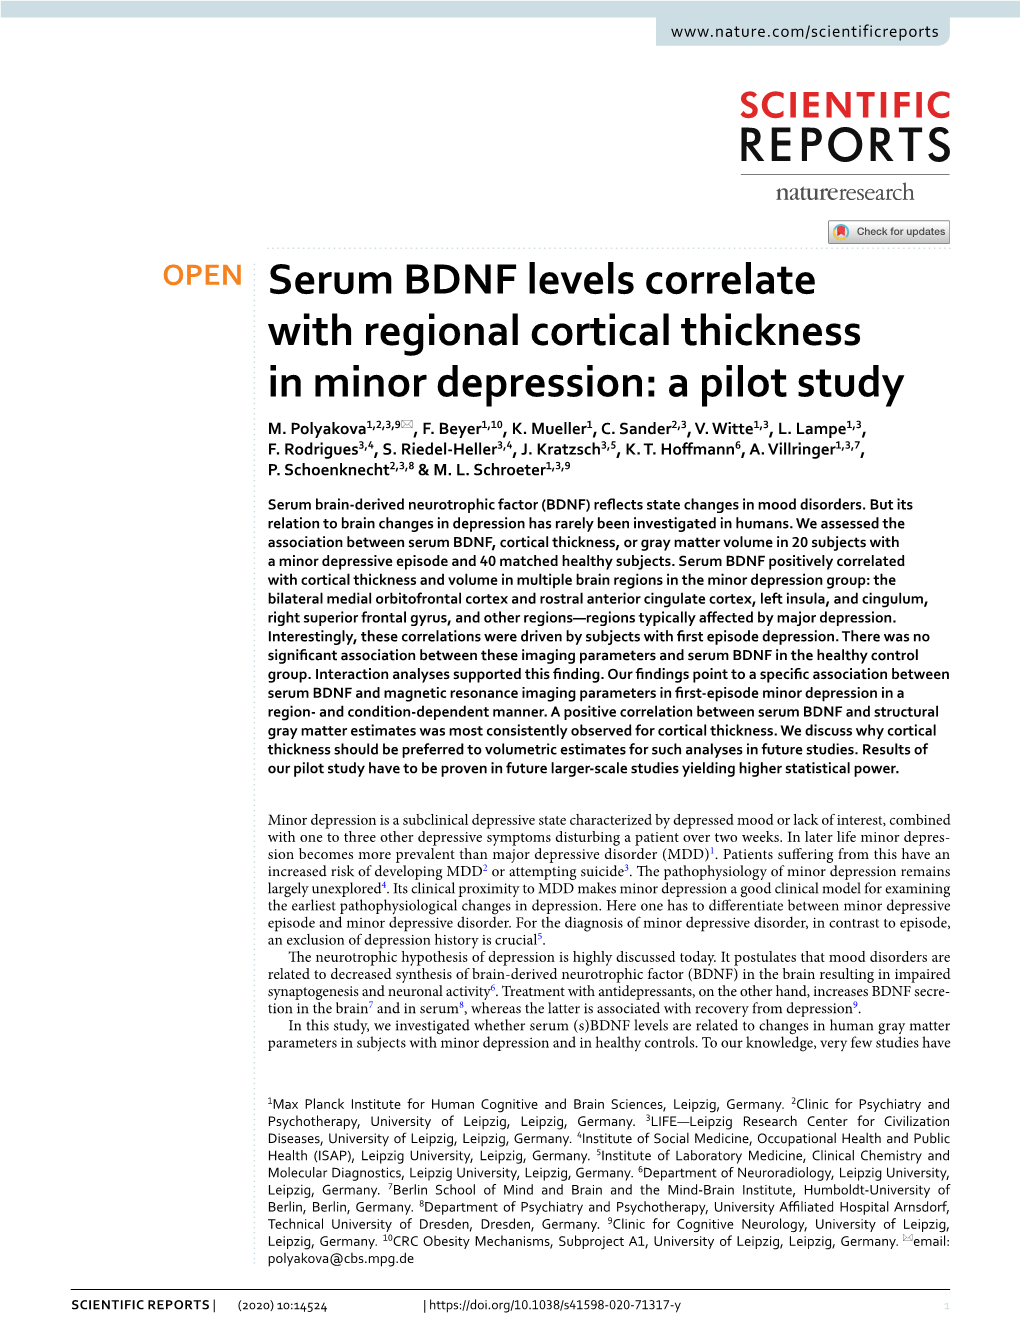 Serum BDNF Levels Correlate with Regional Cortical Thickness in Minor Depression: a Pilot Study M